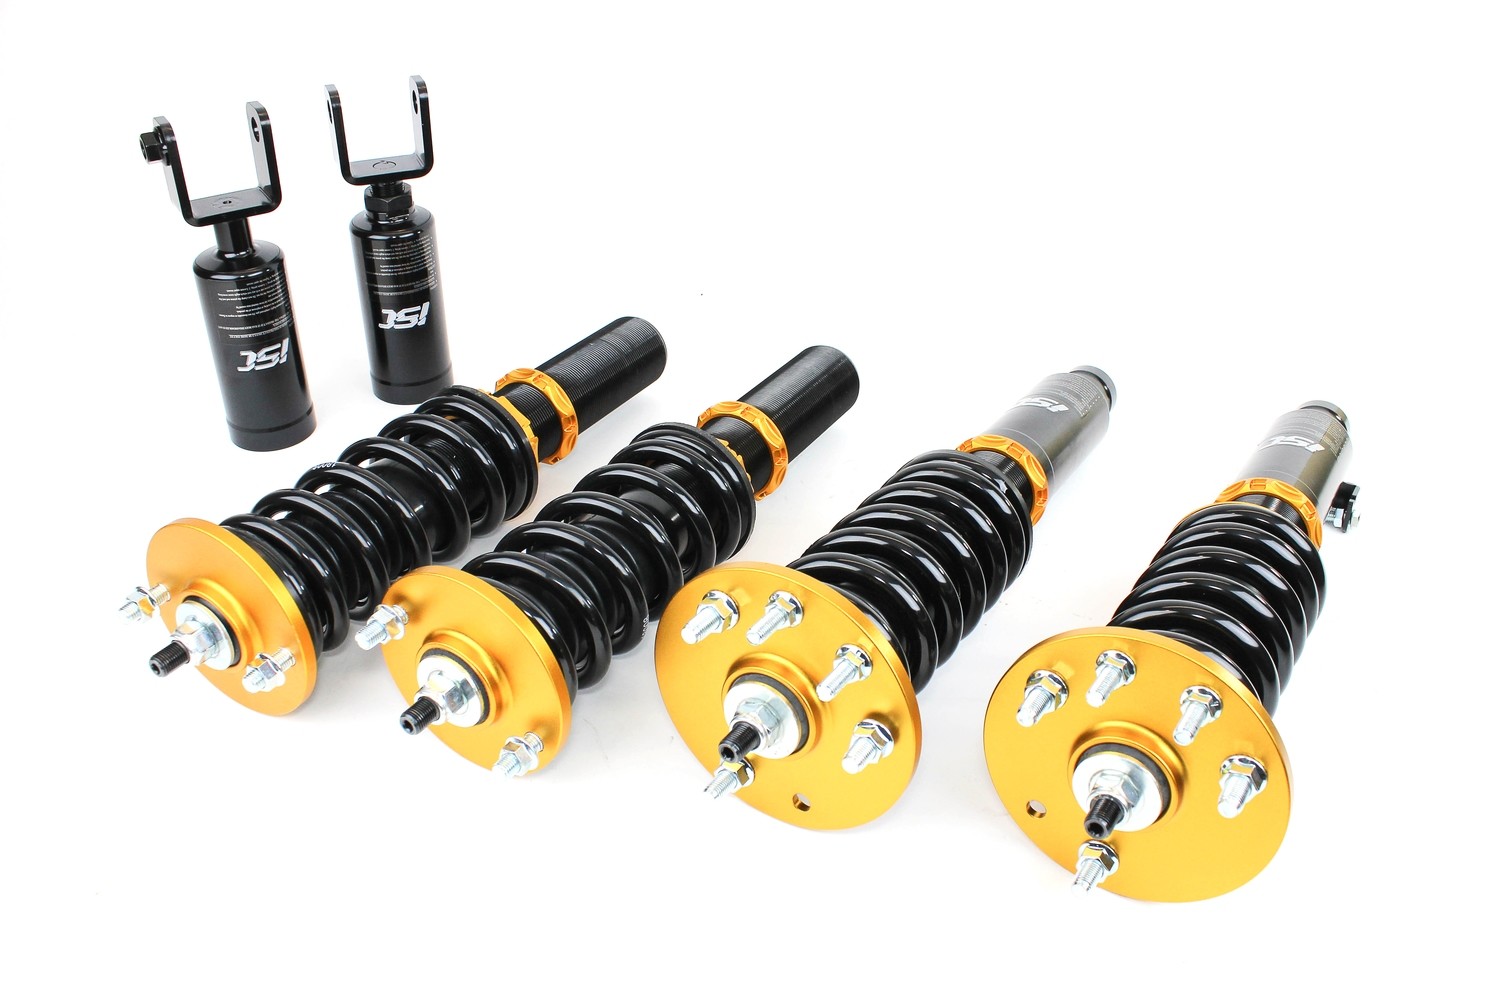 CLEARANCE Acura TL Gen2 (99-03) ISC Basic Coilover Suspension - Street Sport Valving Clearance